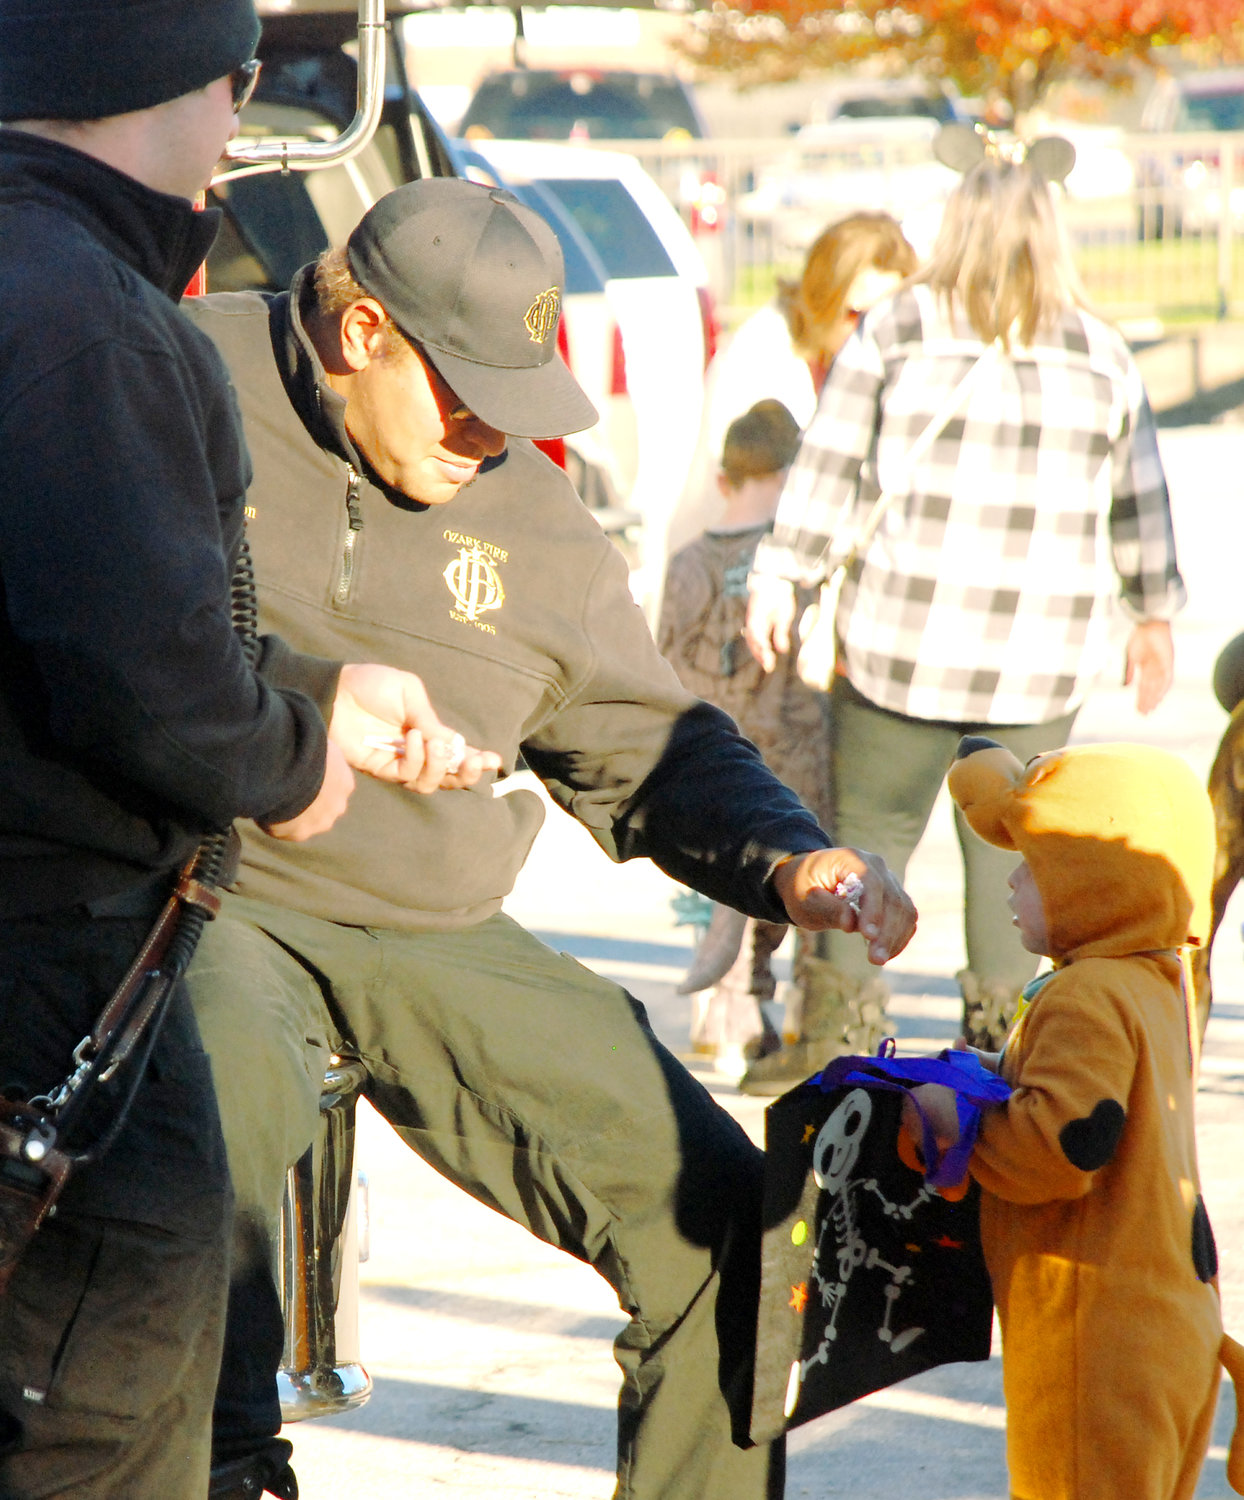 SCOOBY DOO (right) receives a treat from an Ozark firefighter in front of the Ozark police station on Halloween.